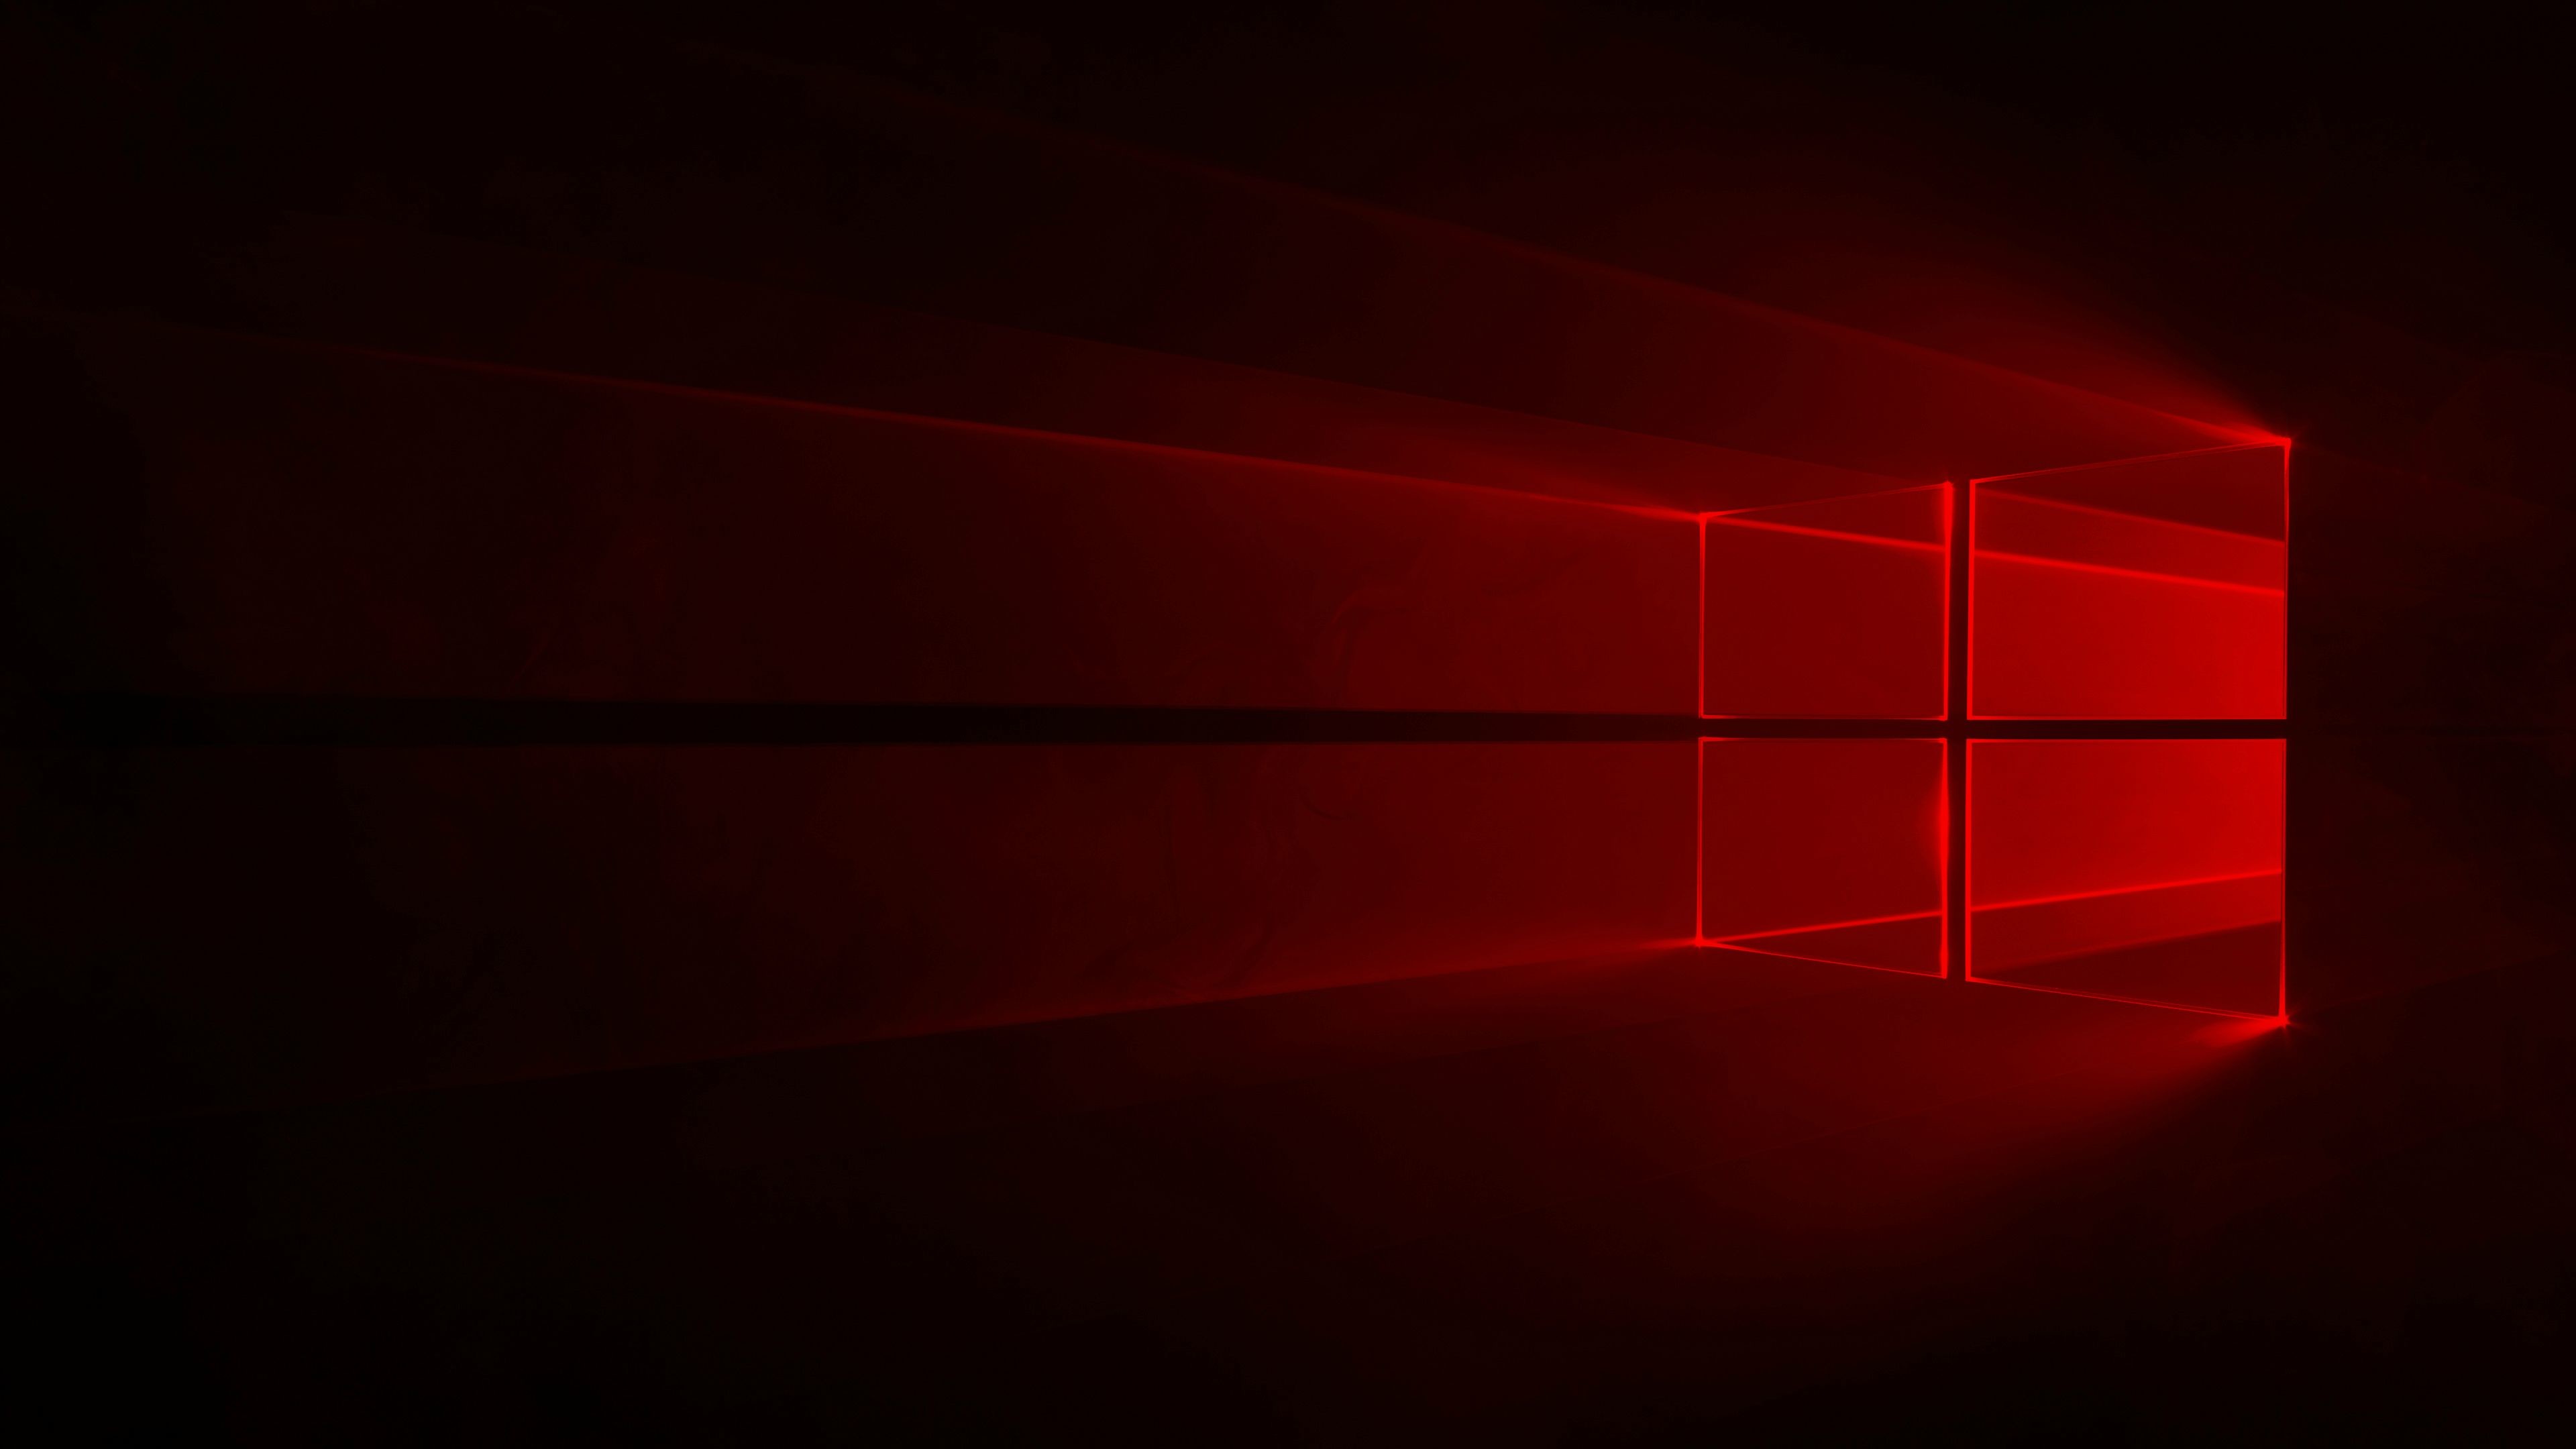 Improve <b>Windows 10 Wallpaper</b> Quality with this Registry trick